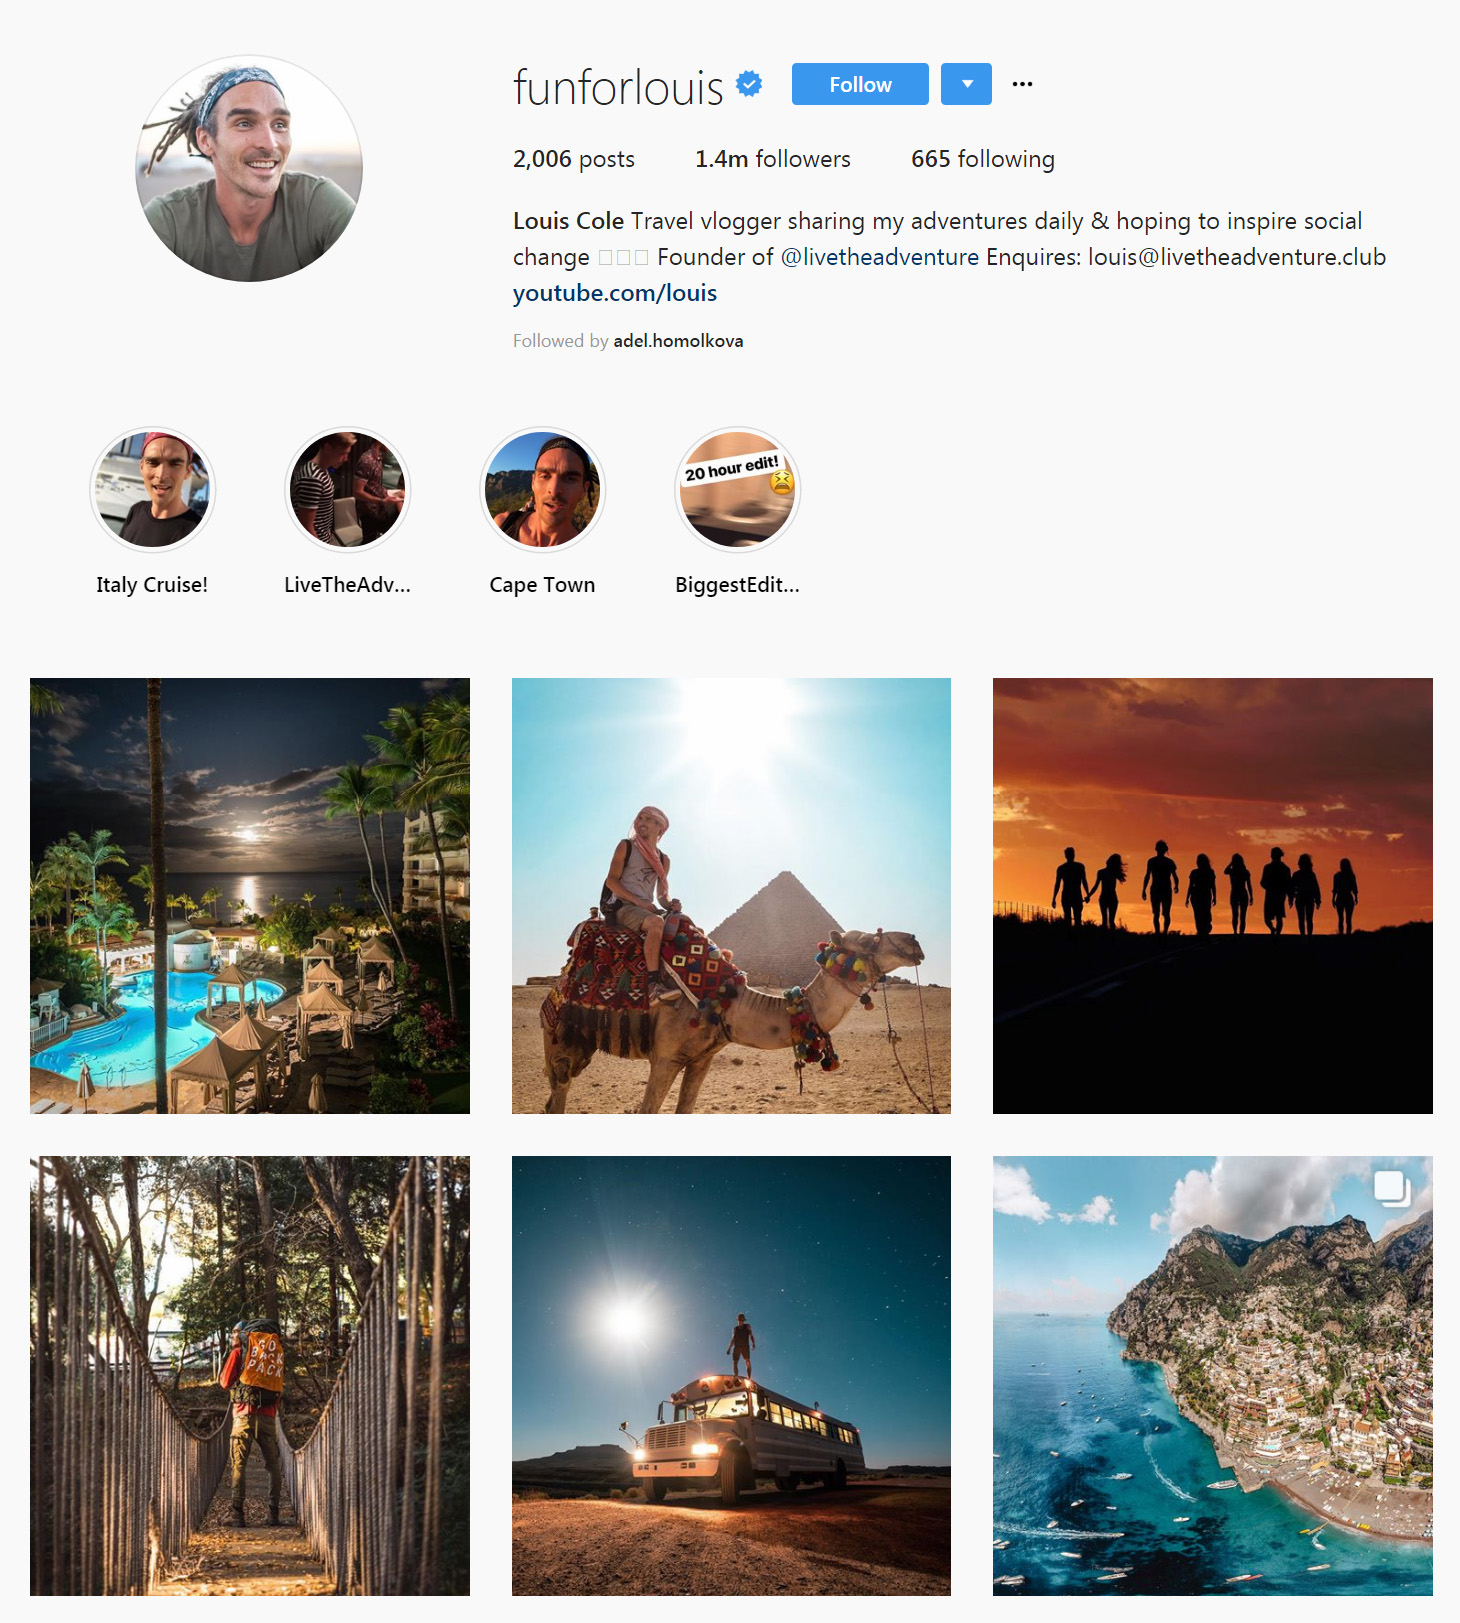 The Real Top 10 Travel Influencers on Instagram